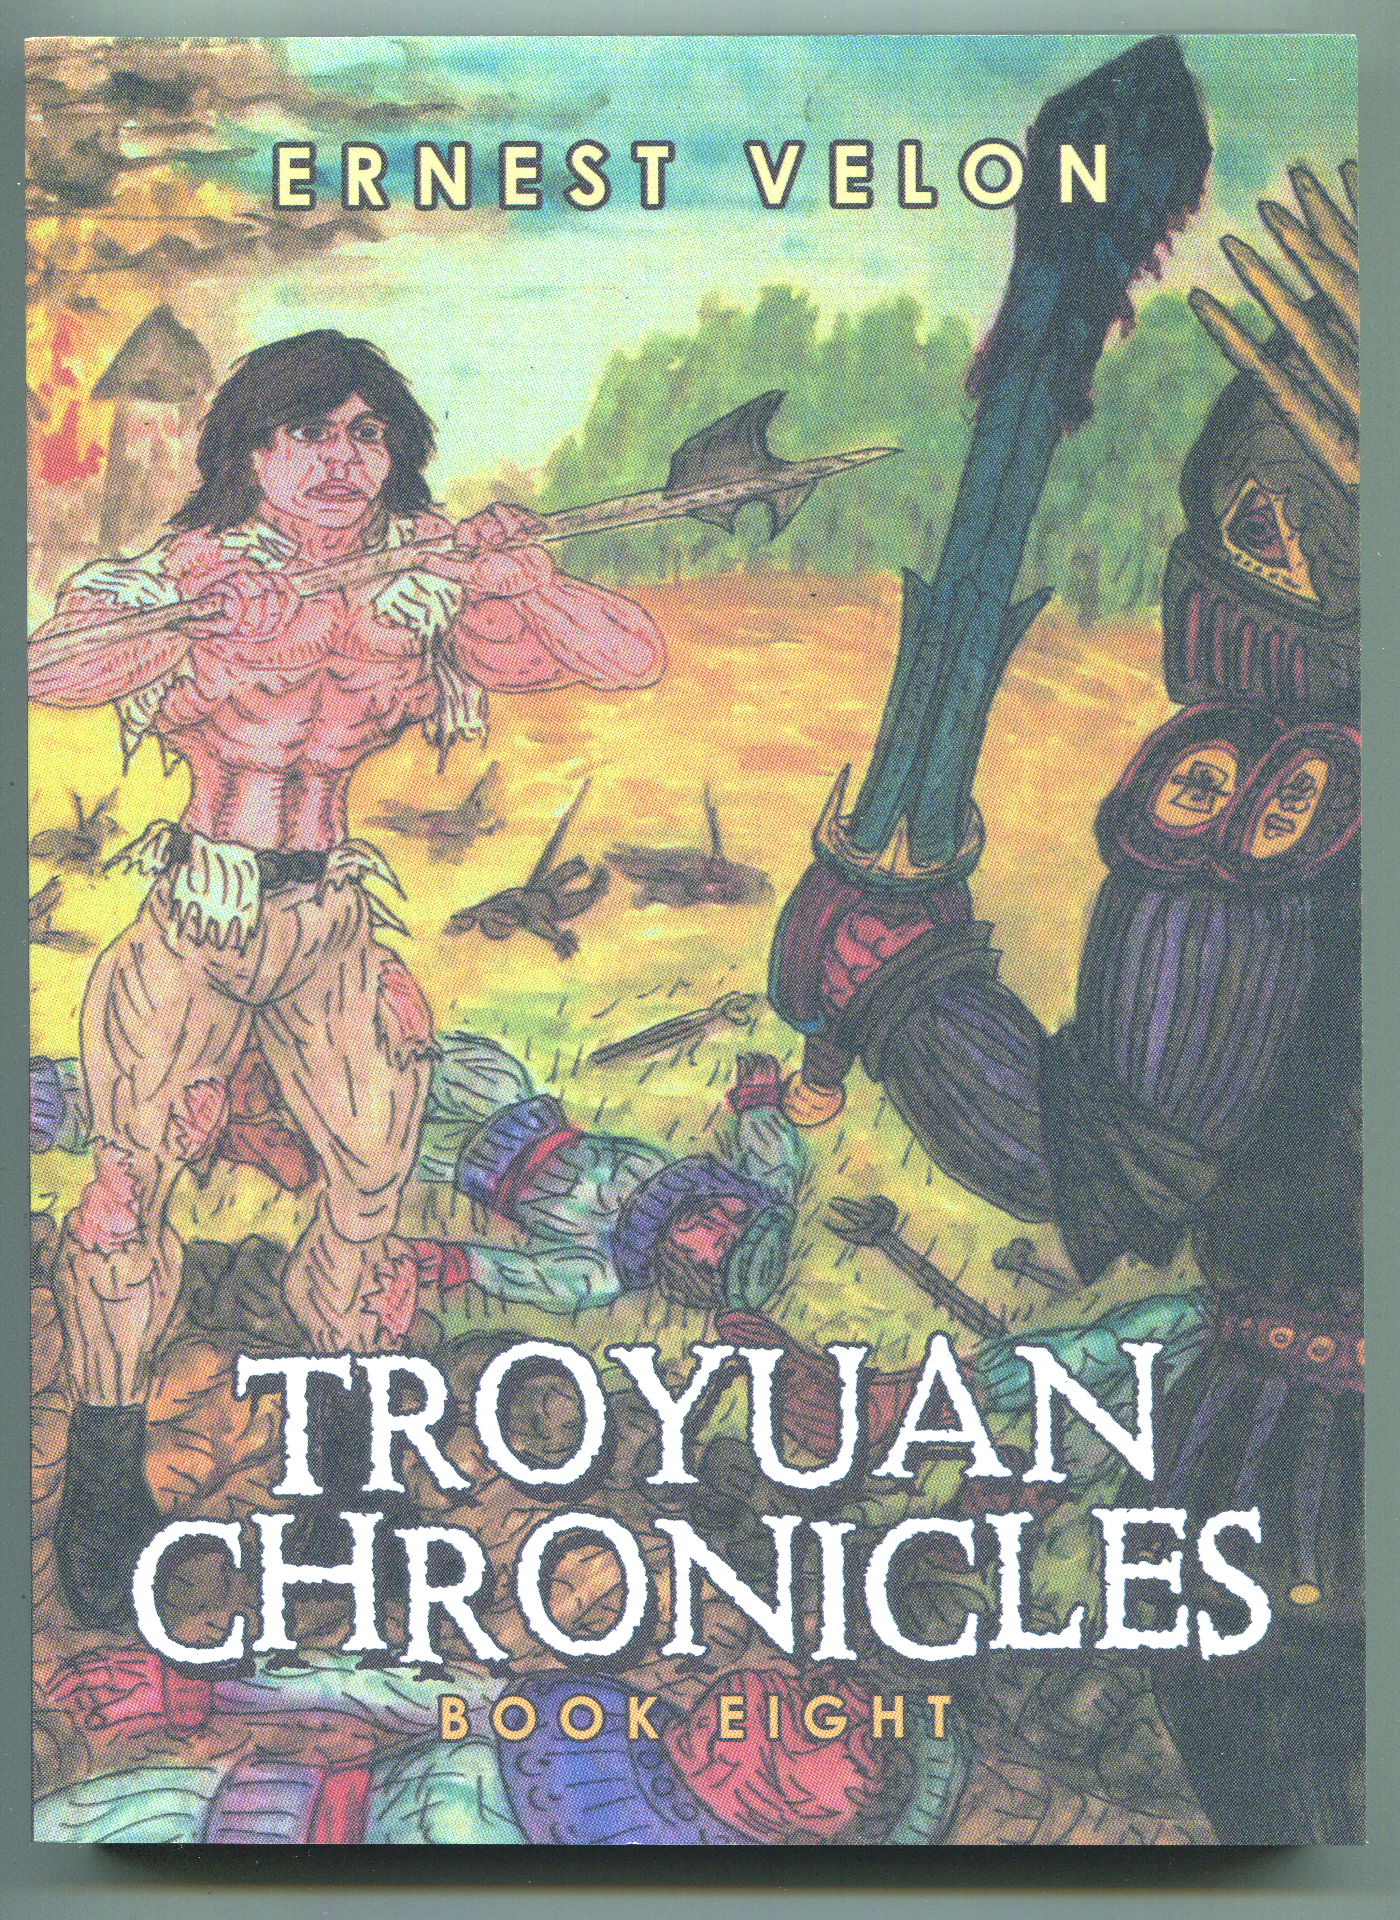 The Troyuan Chronicles... Book 8